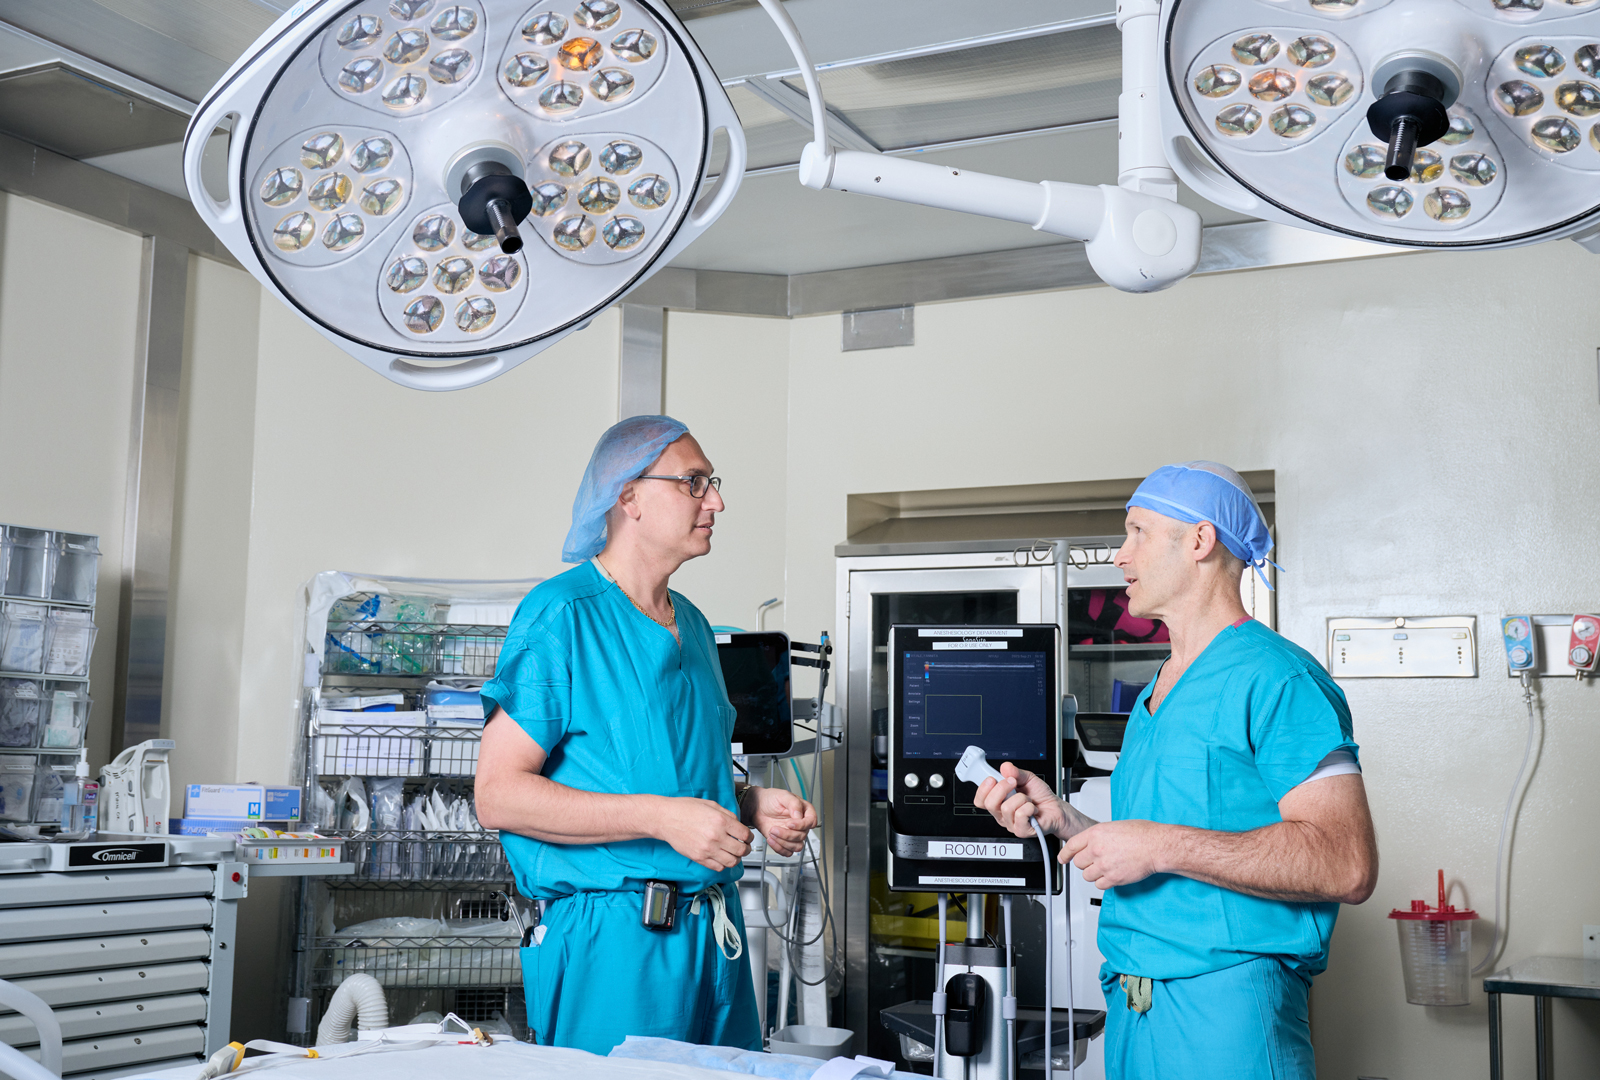 Two healthcare providers talk in an operating room